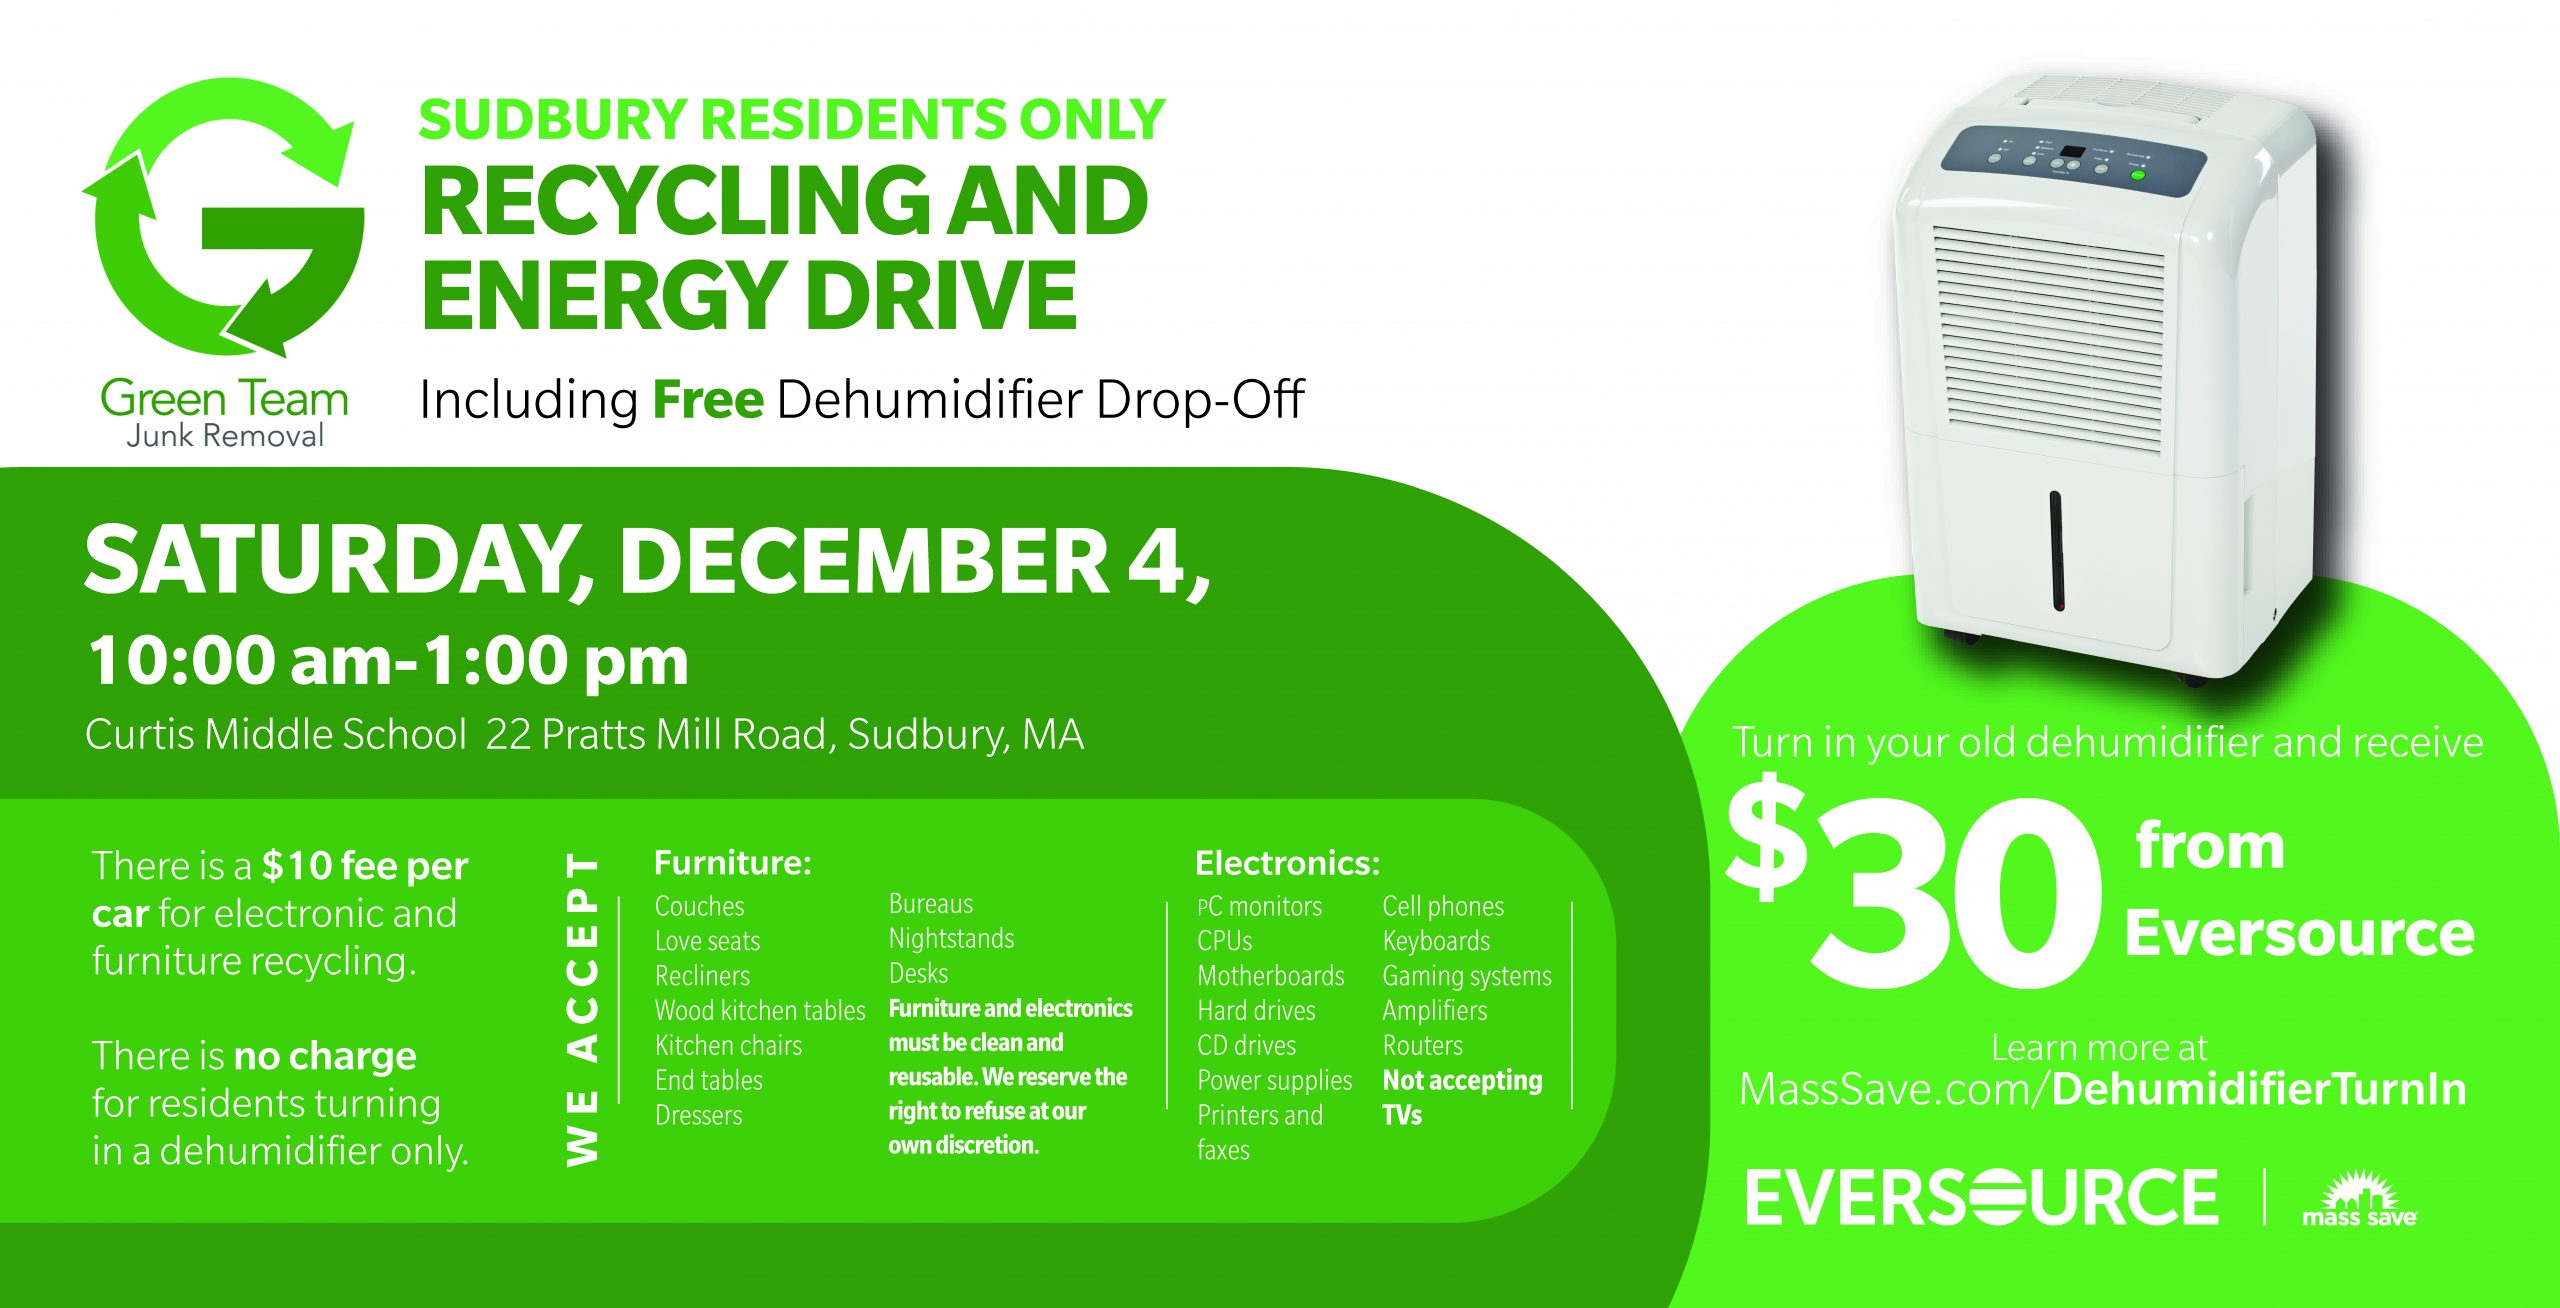 Sudbury Recycling and Energy Drive 12/4 at Curtis